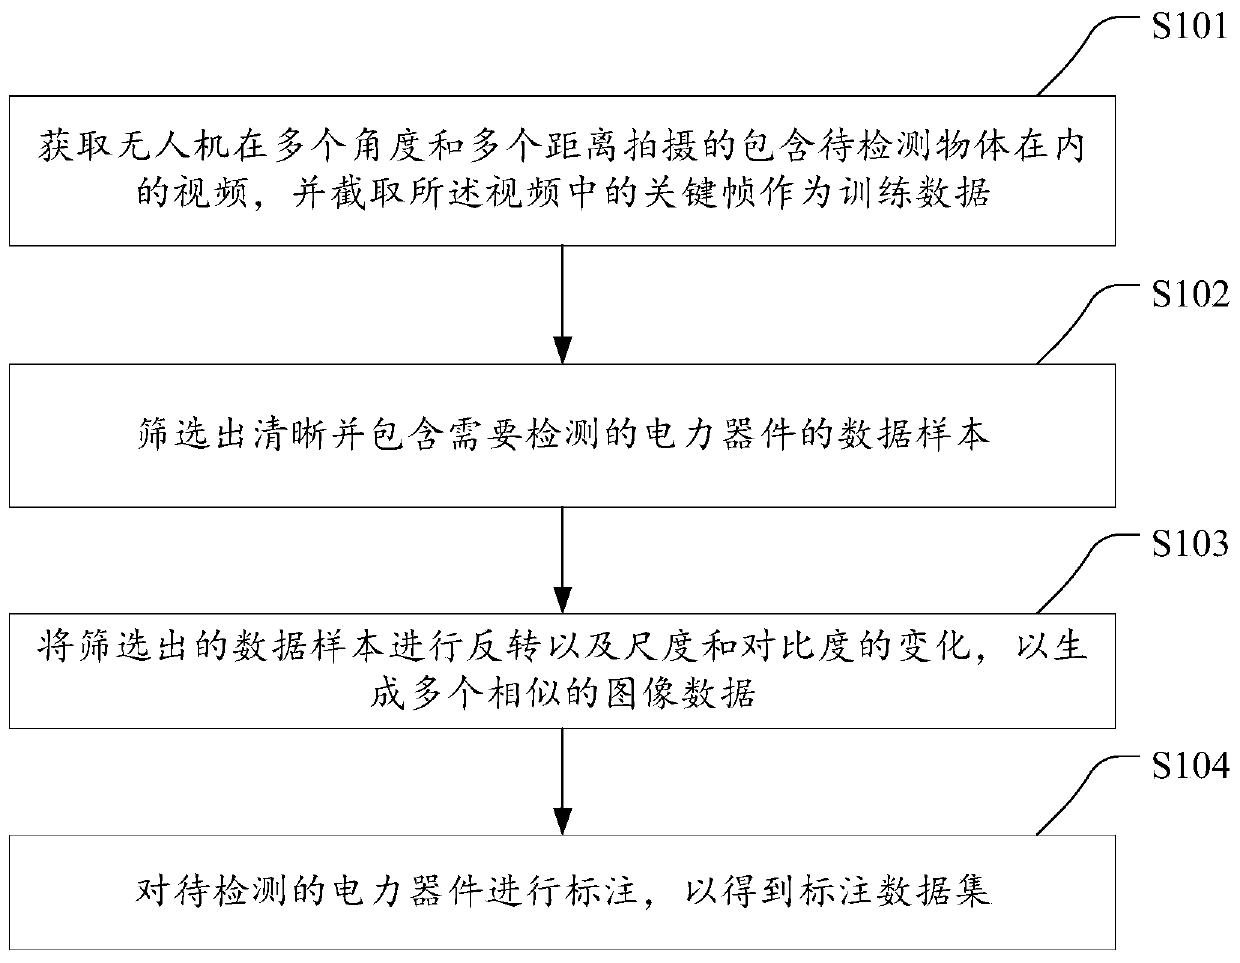 Unmanned aerial vehicle electric power inspection method and device and storage medium